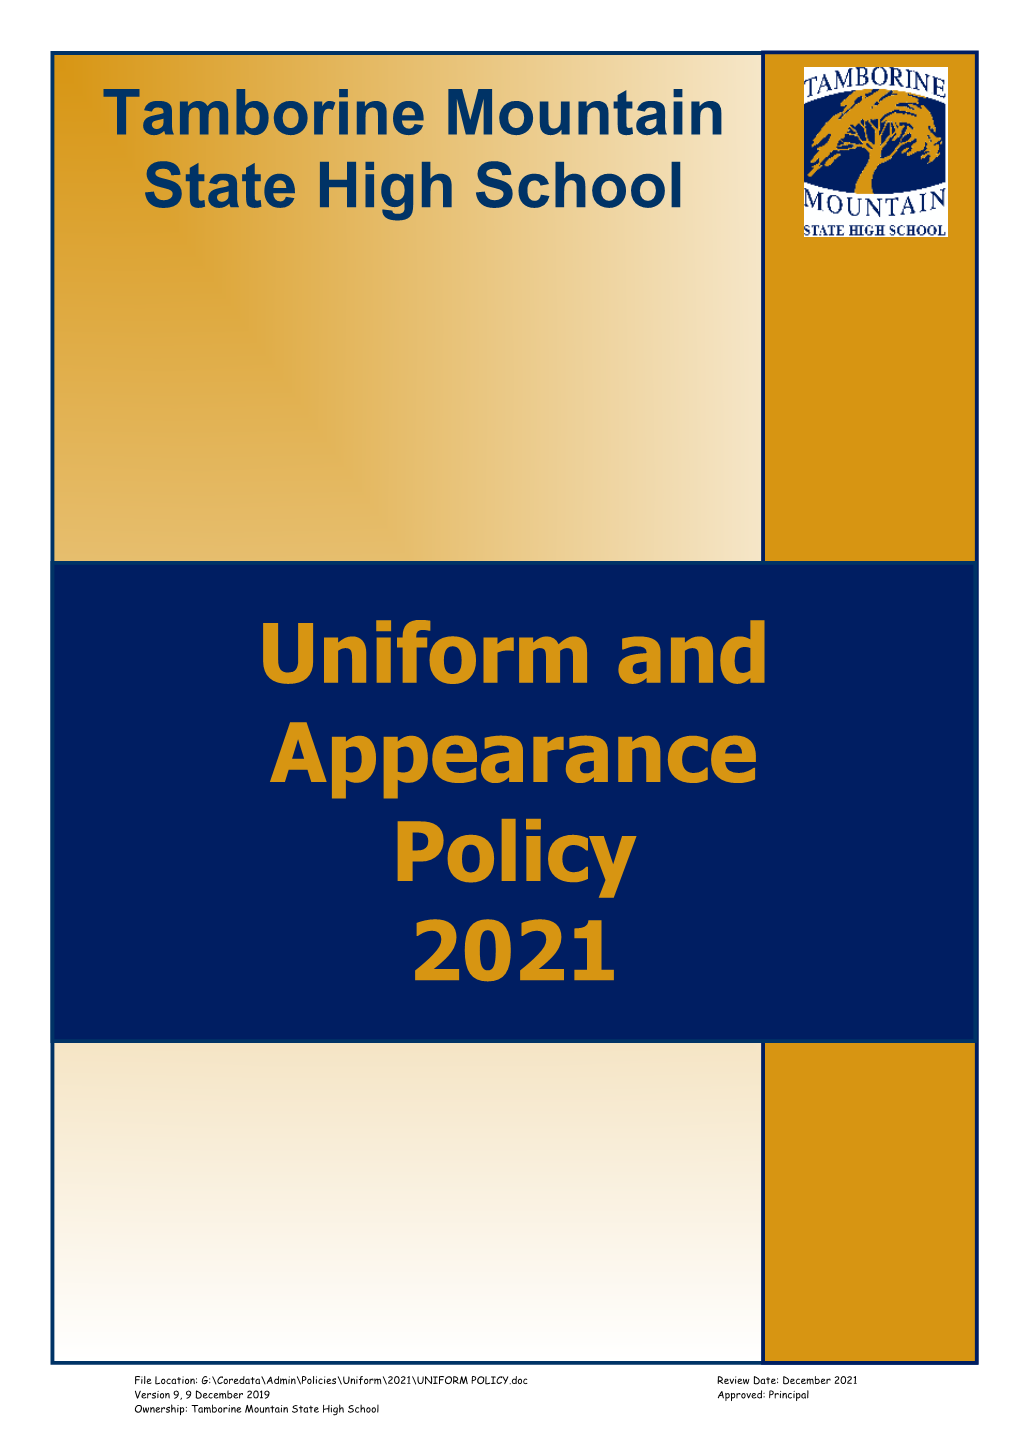 Uniform and Appearance Policy 2021